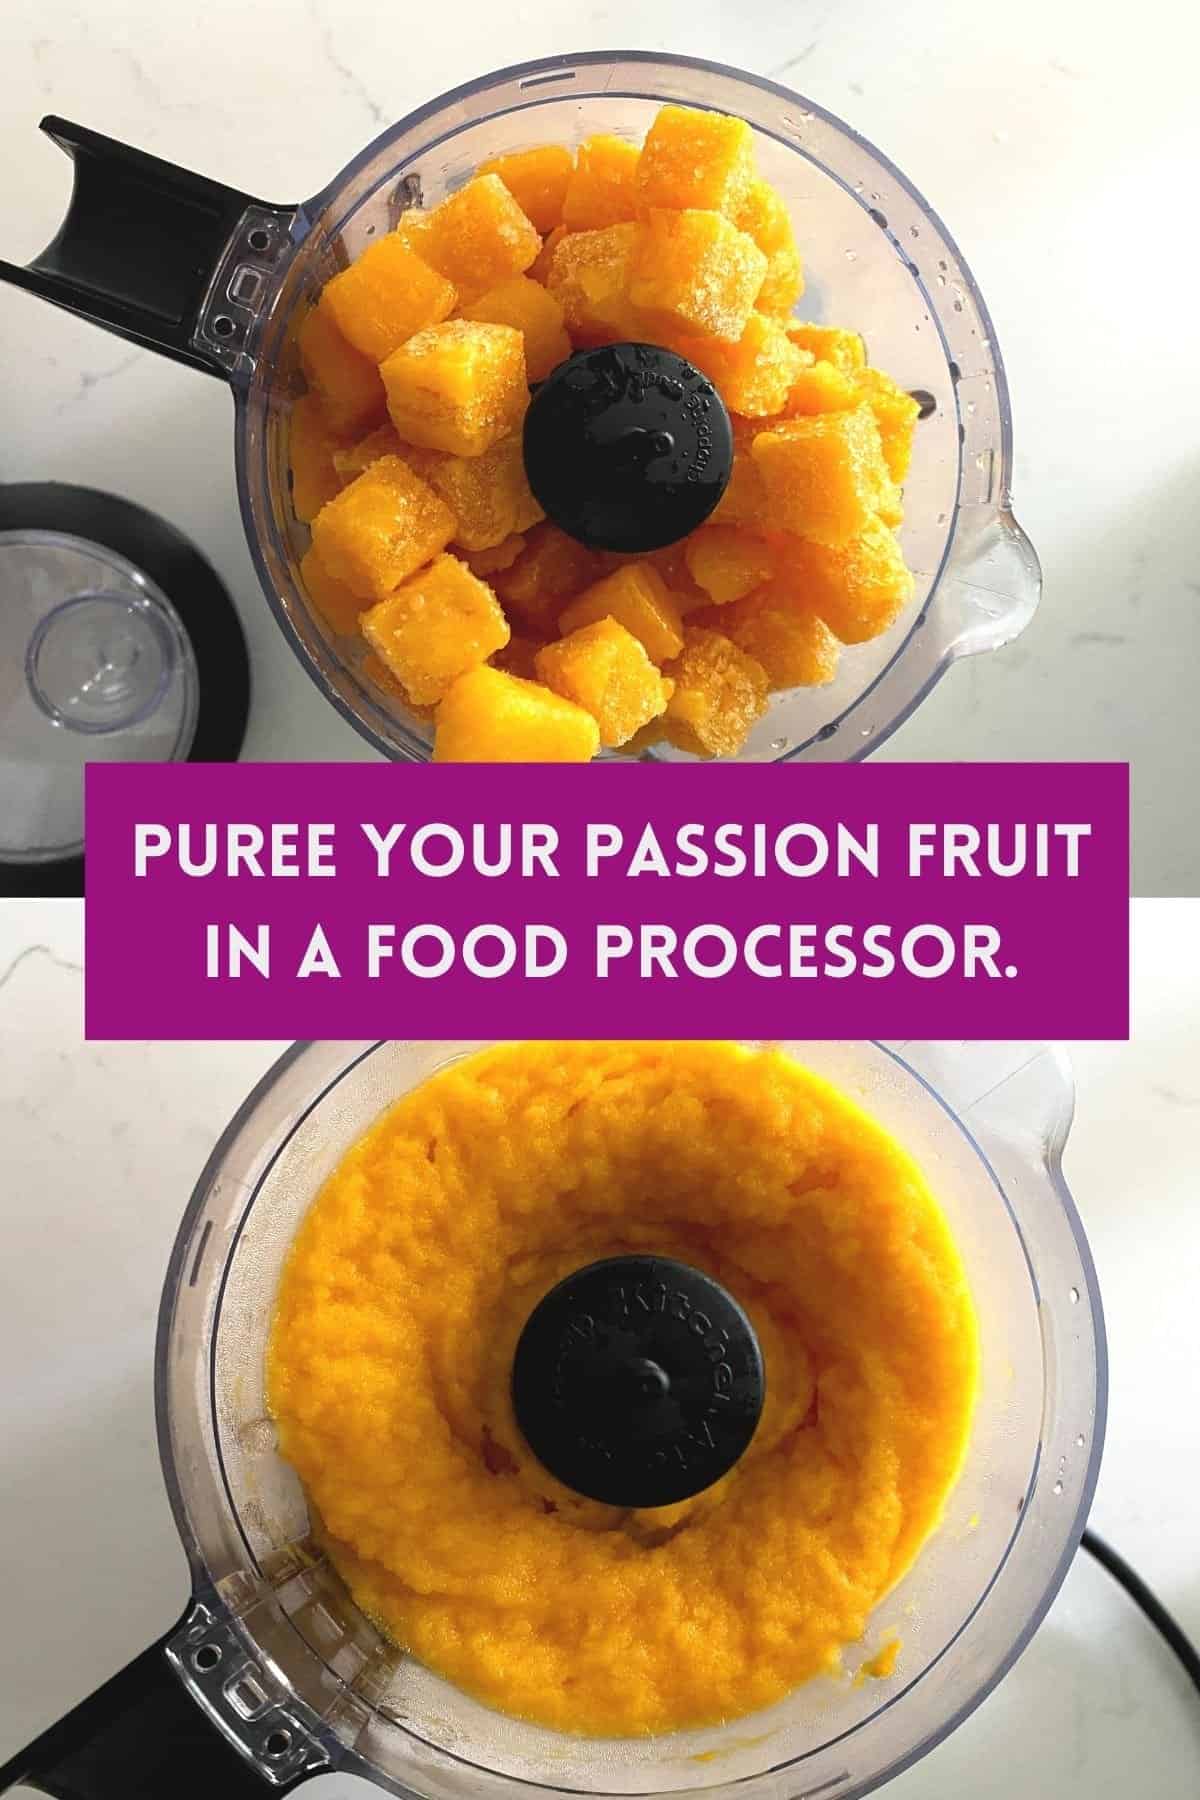 Frozen passion fruit blended into a puree in food processor.